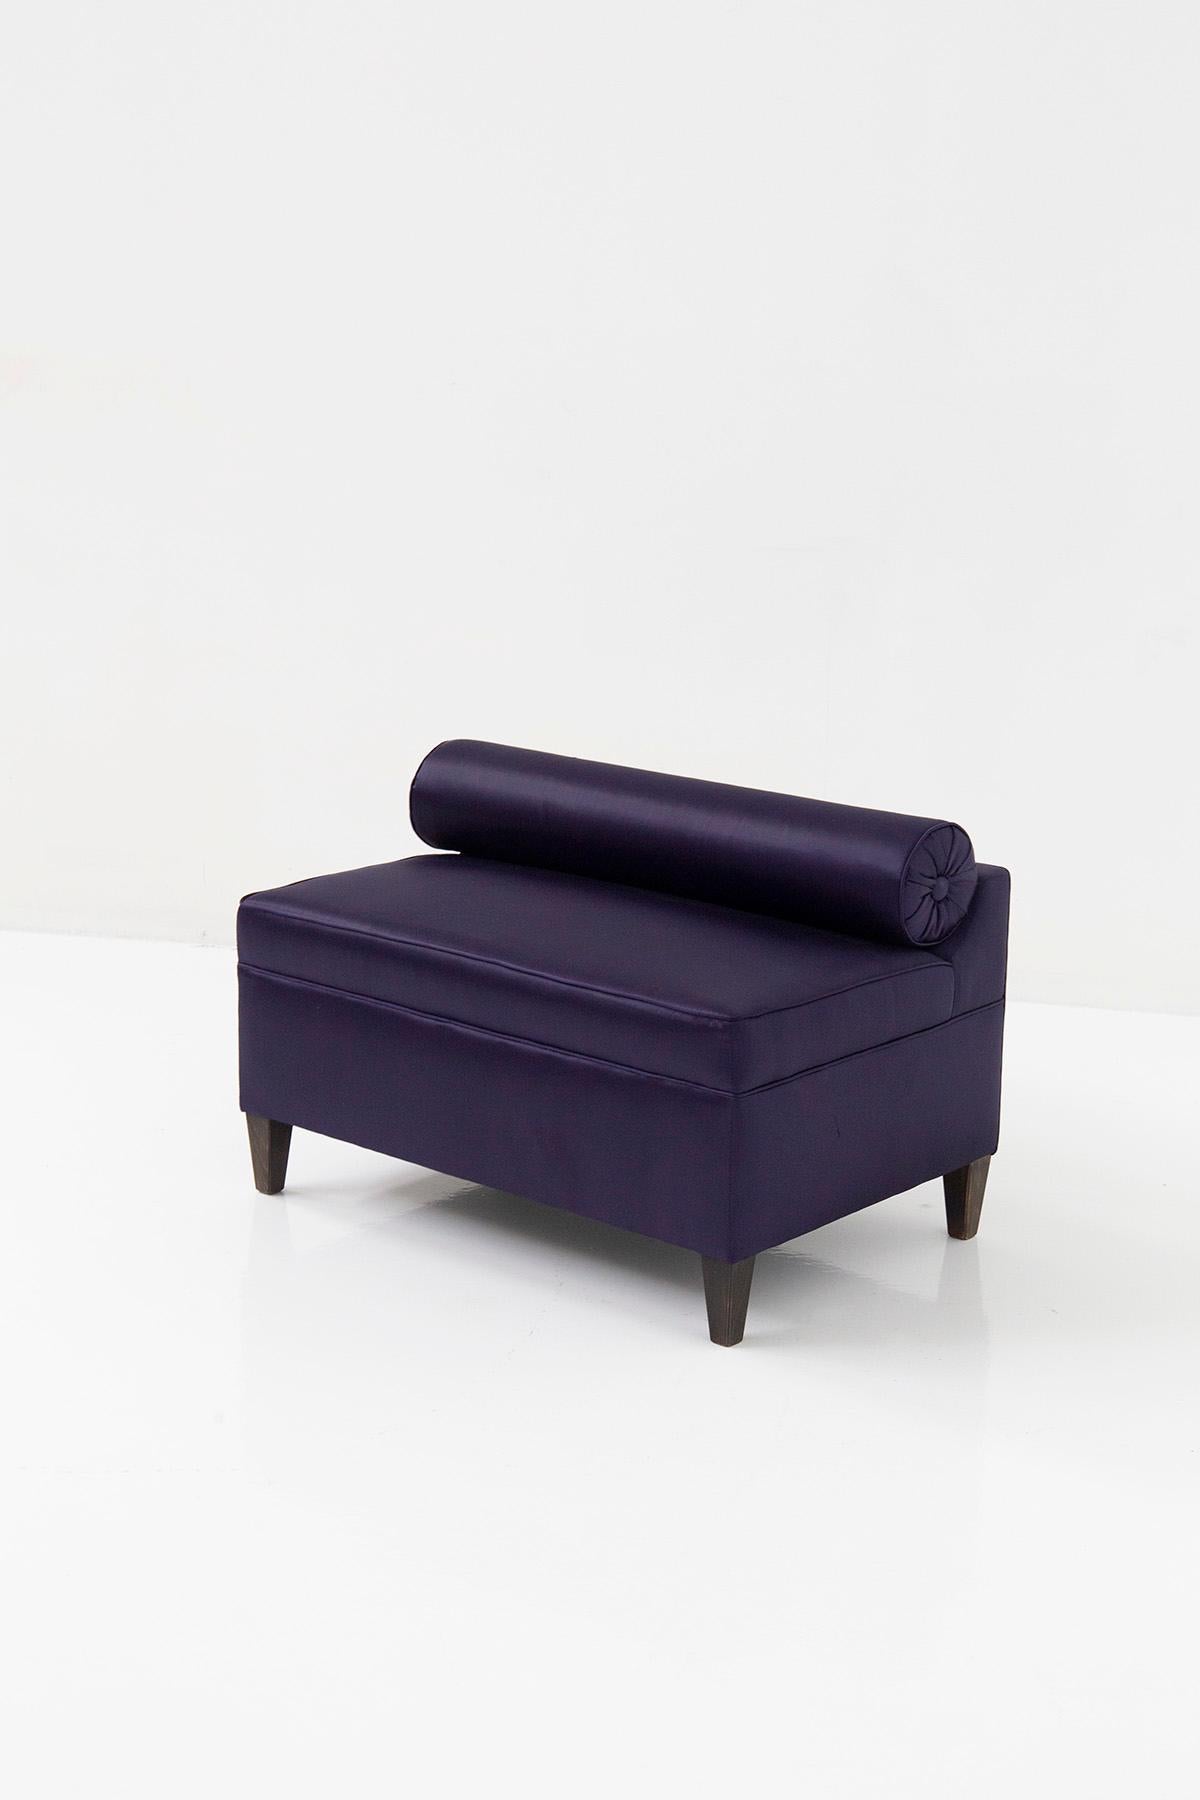 Introducing an elegant 20th-century Italian bench or settee, entirely crafted with purple satin fabric. This exquisite piece exudes elegance and is ideal for furnishing quirky living rooms with a classic and glamorous style. By adding this sofa to